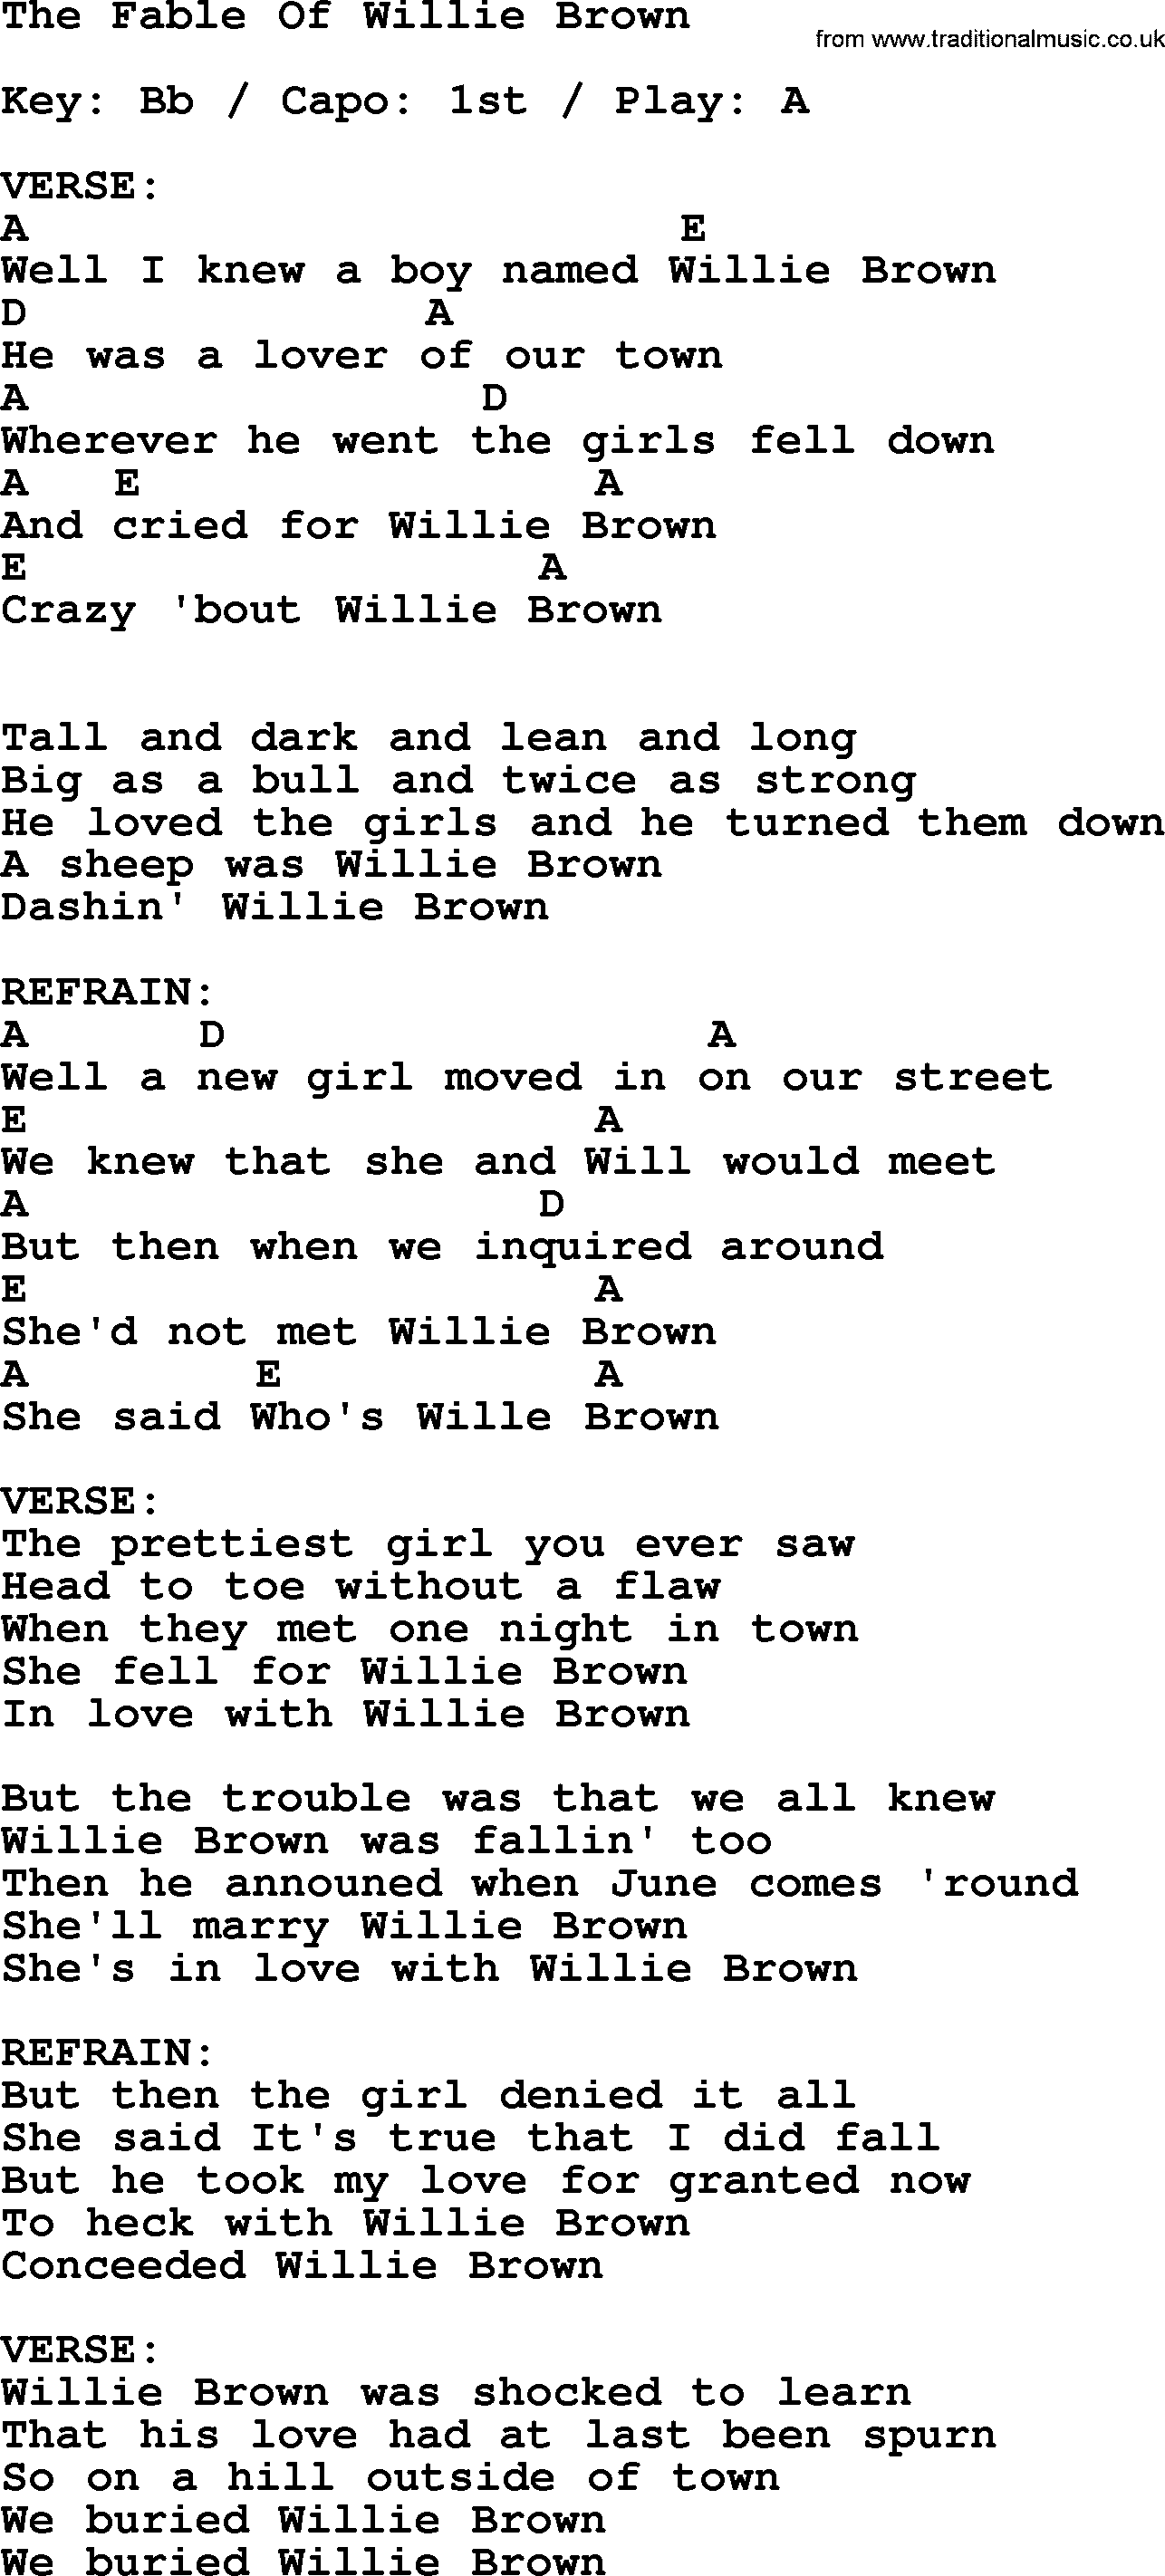 Johnny Cash song The Fable Of Willie Brown, lyrics and chords